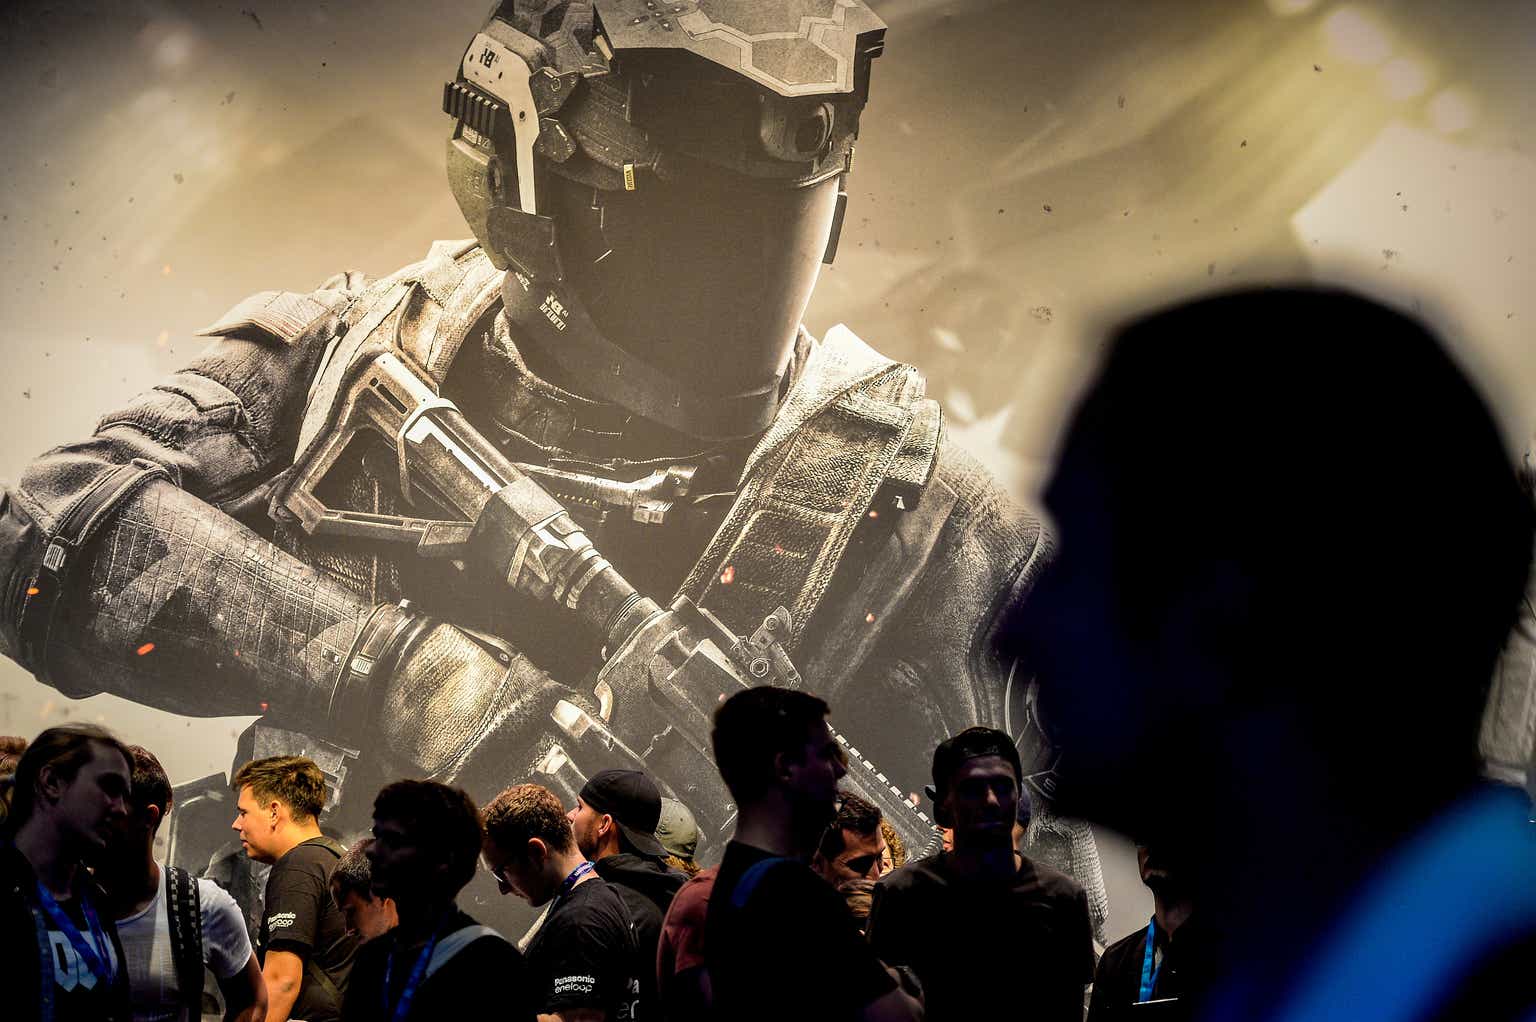 In 2019, The State Of Activision-Blizzard Is Not Strong